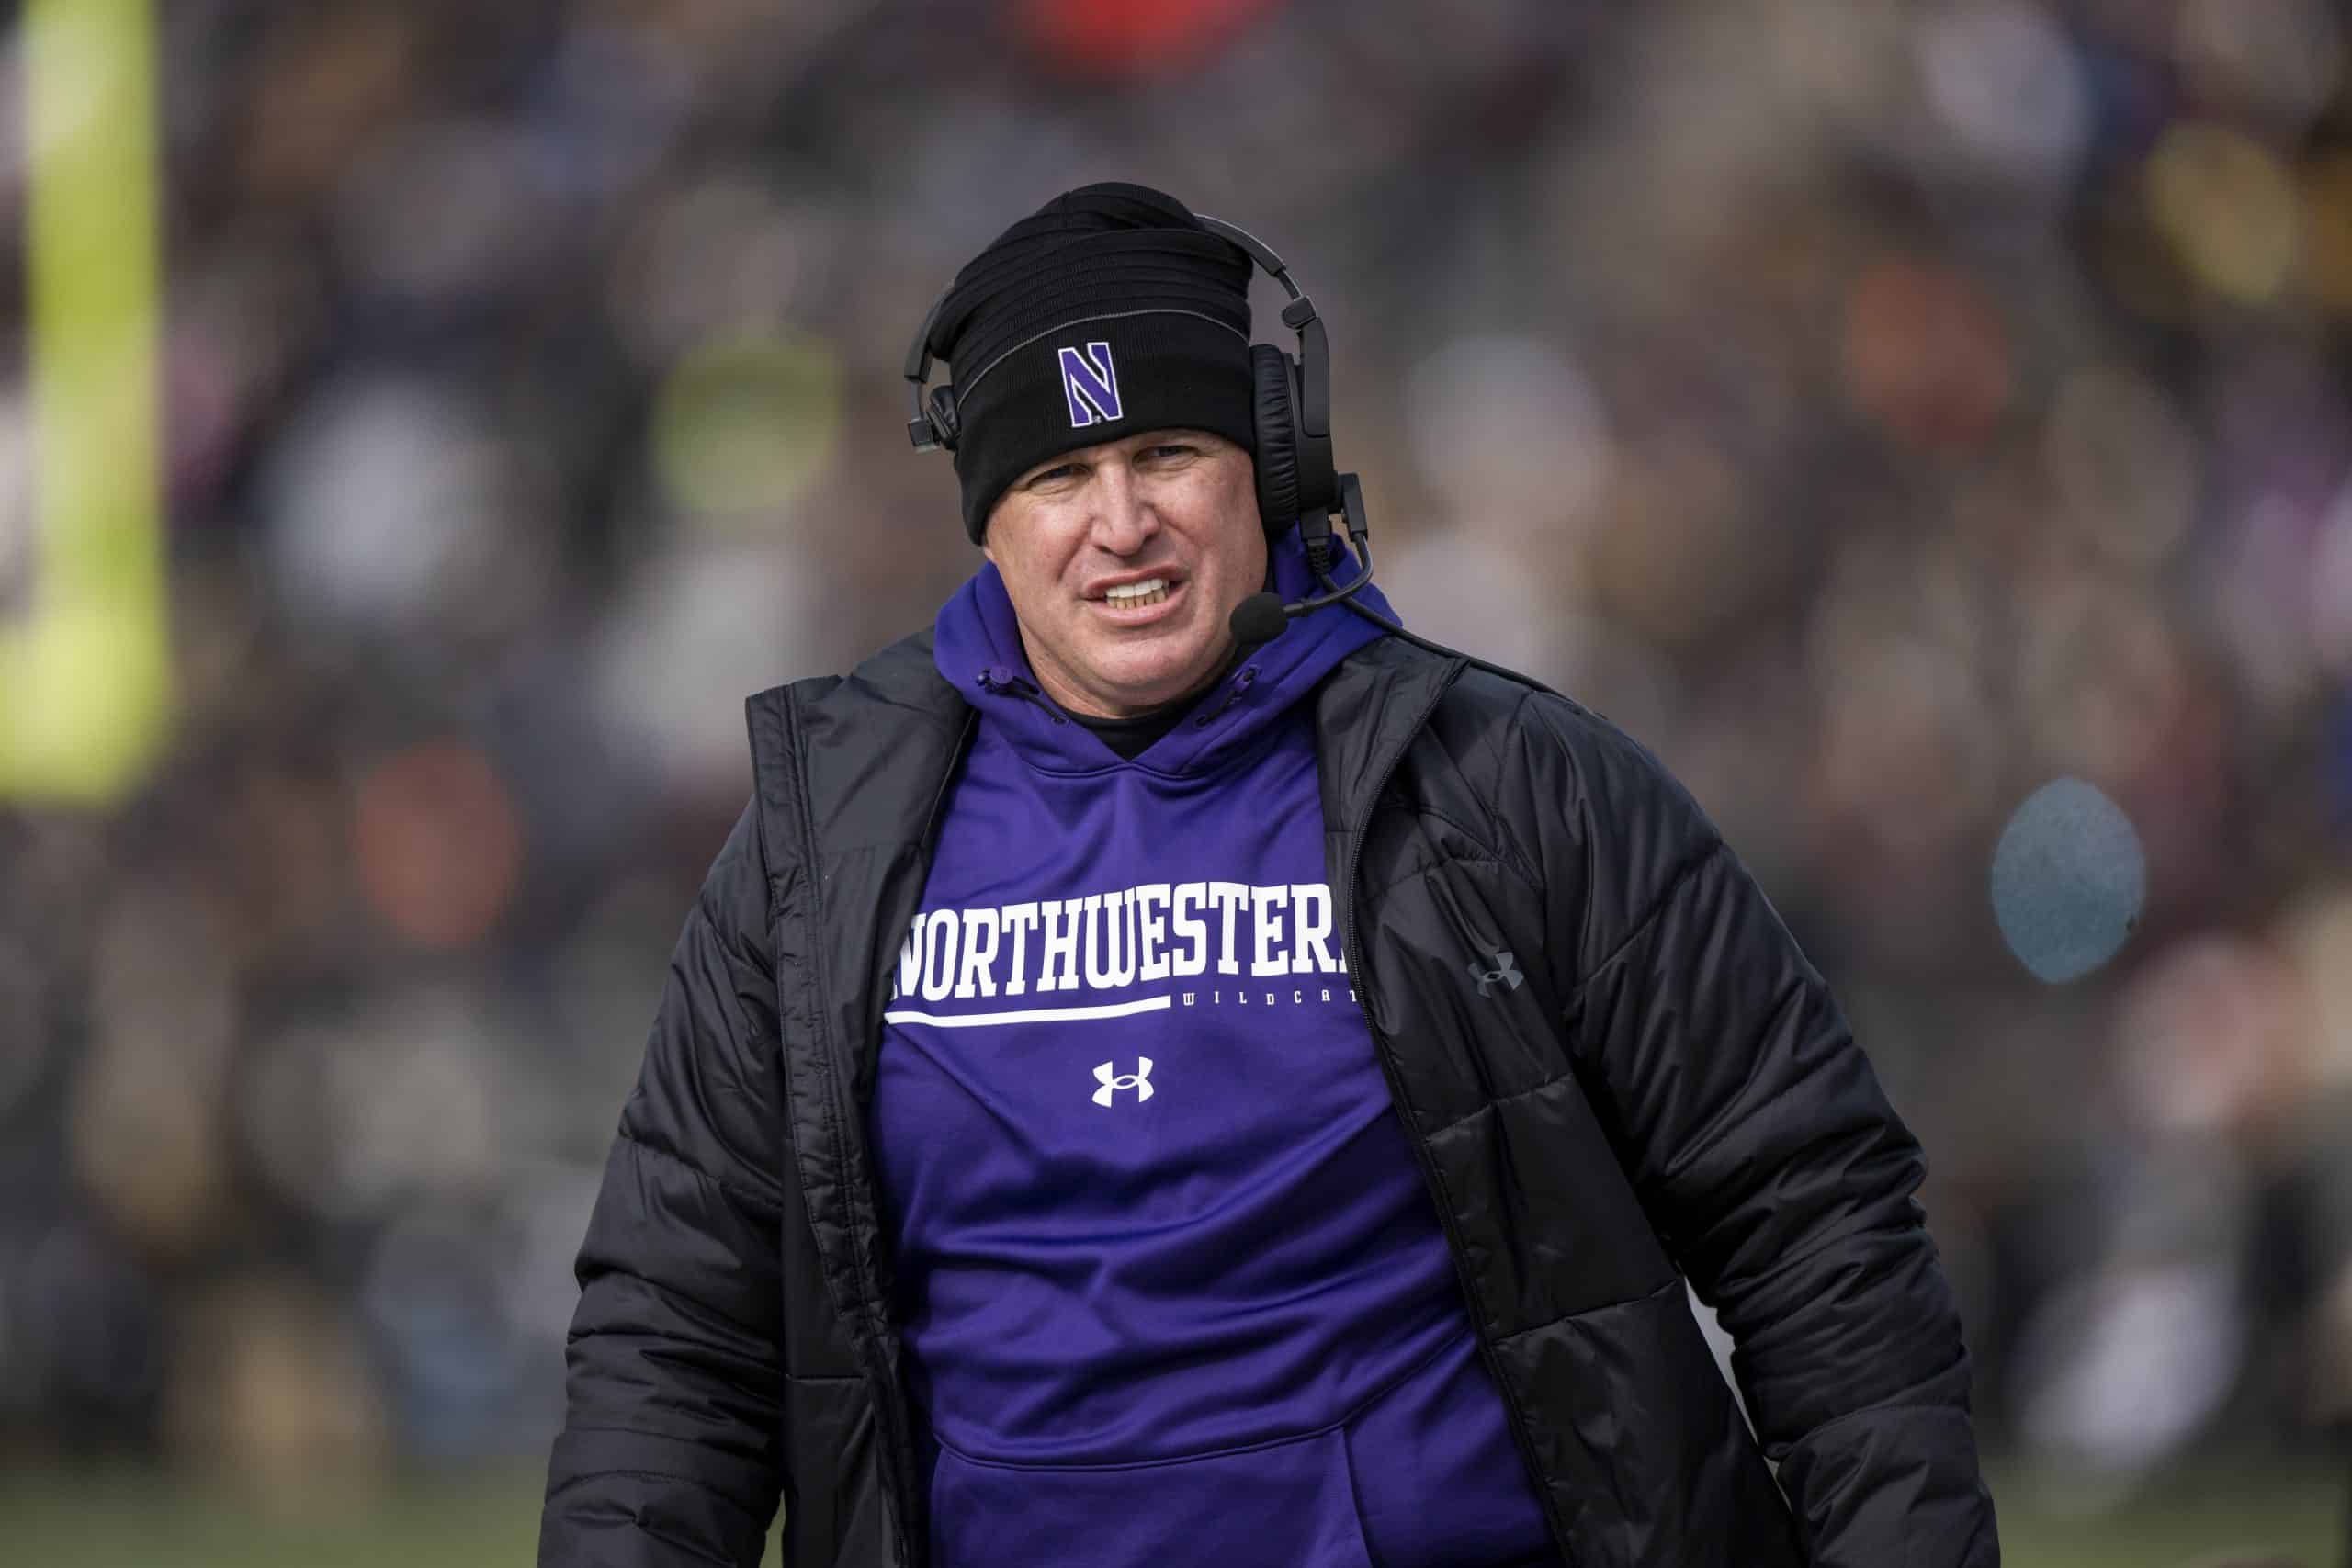 Fitzgerald signed a 10-year, $57 million contract extension with Northwestern in 2021.